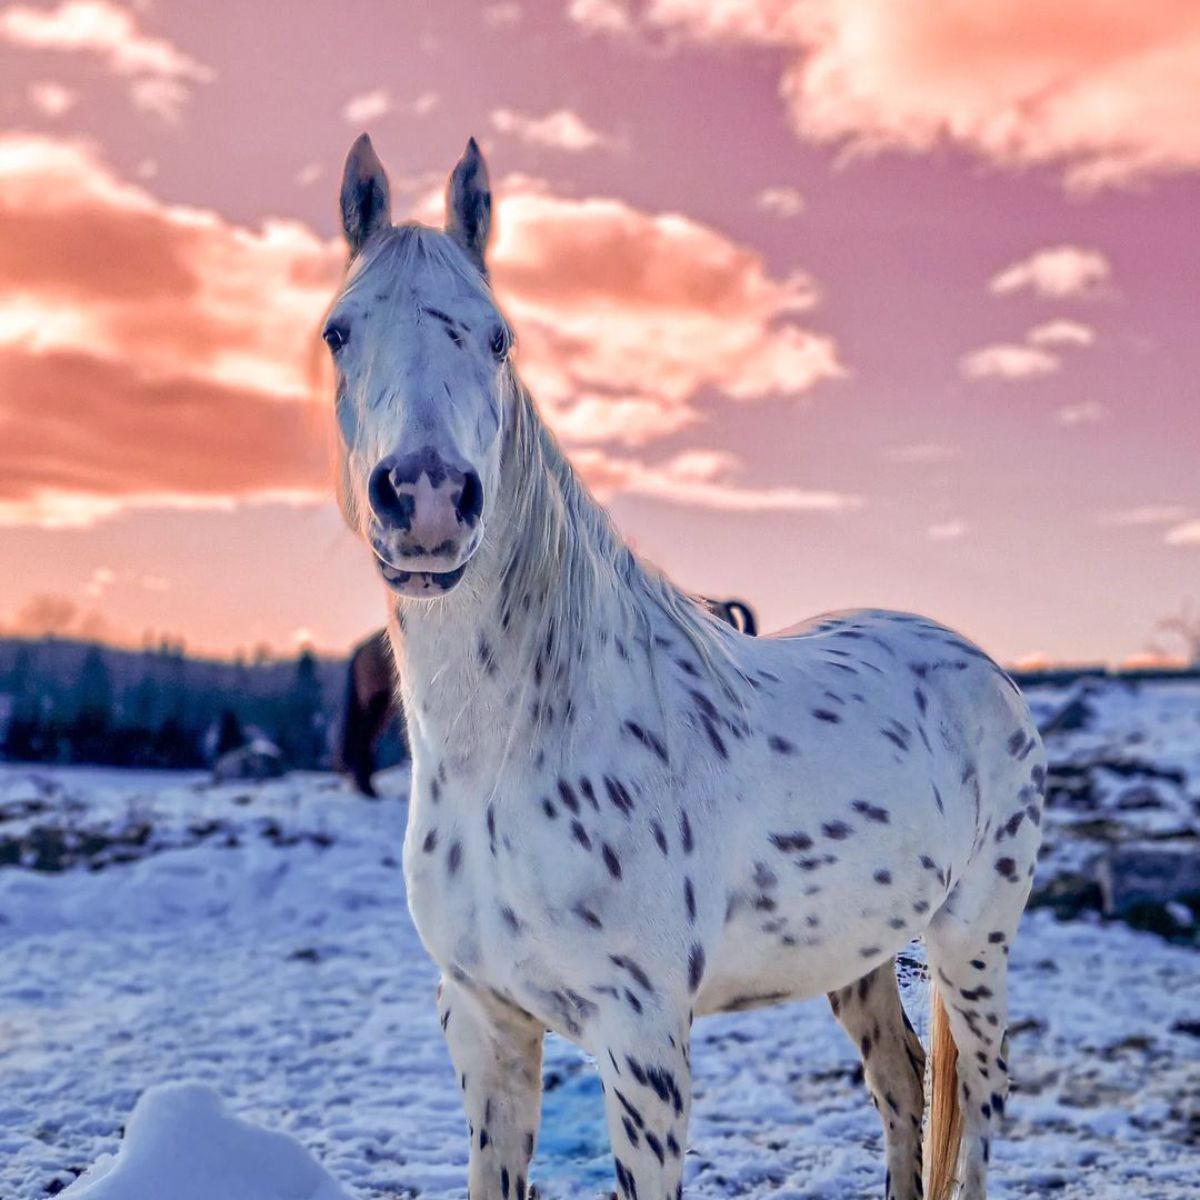 A beautiful Appaloosa horse stands on the snow-covered ground.